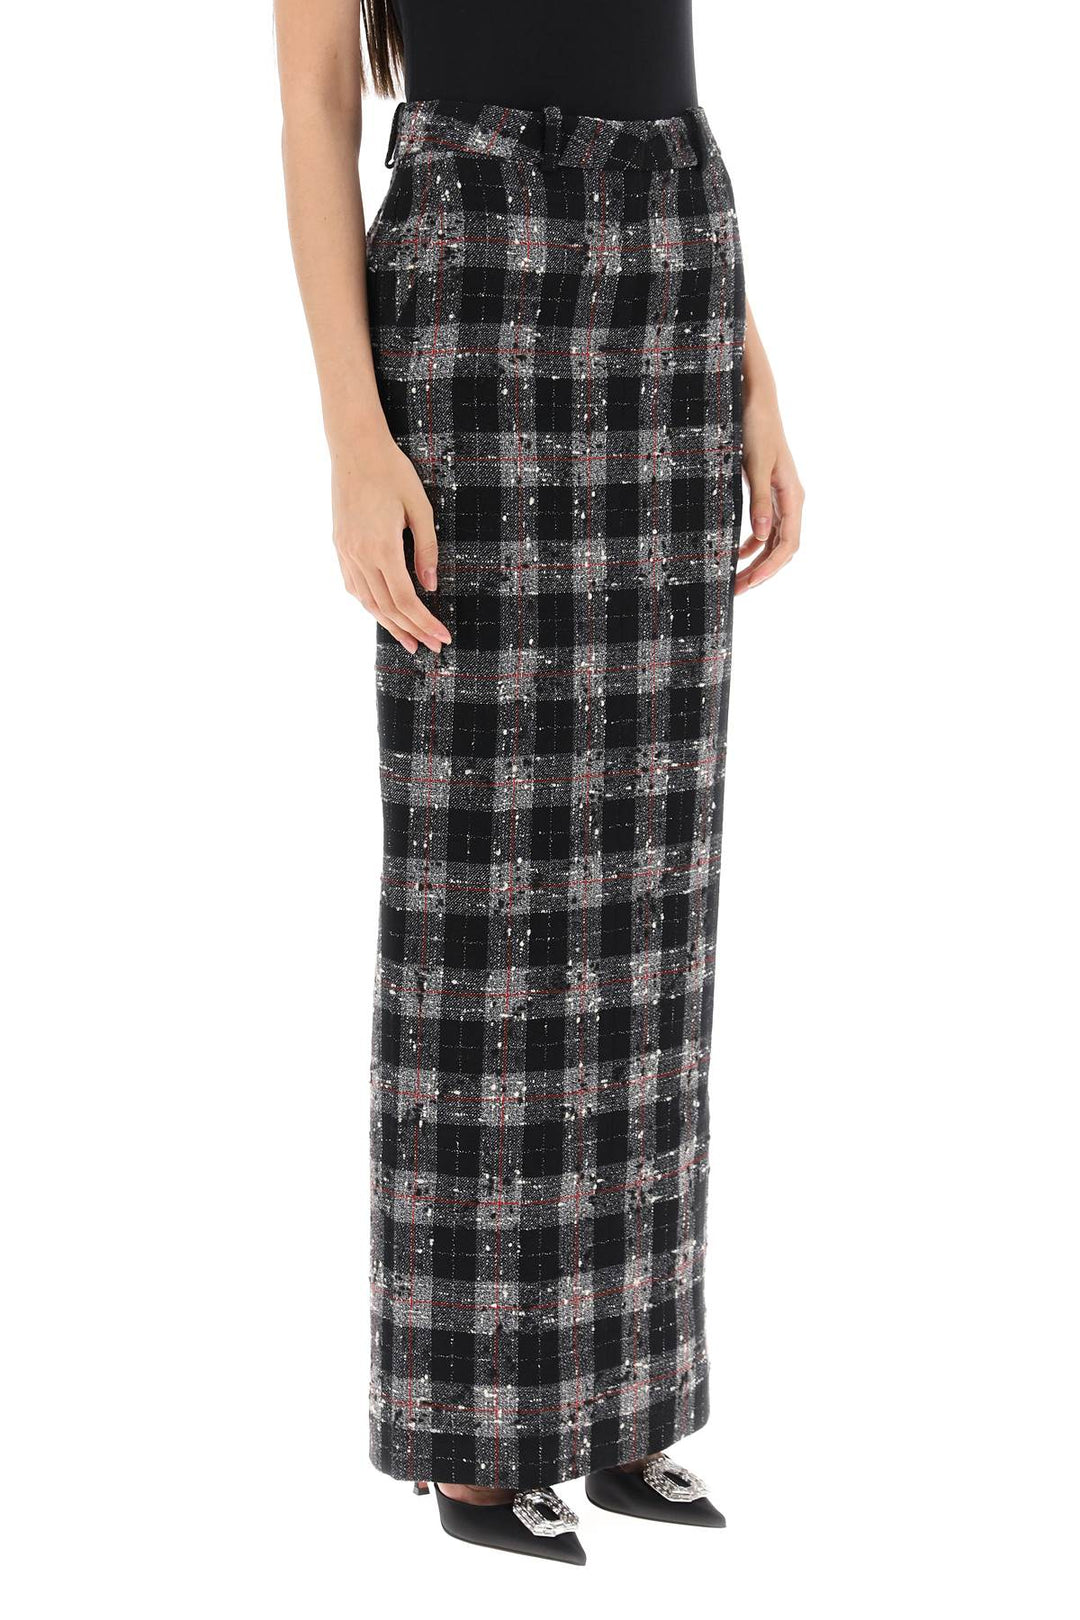 Alessandra Rich Maxi Skirt In Boucle' Fabric With Check Motif   Nero